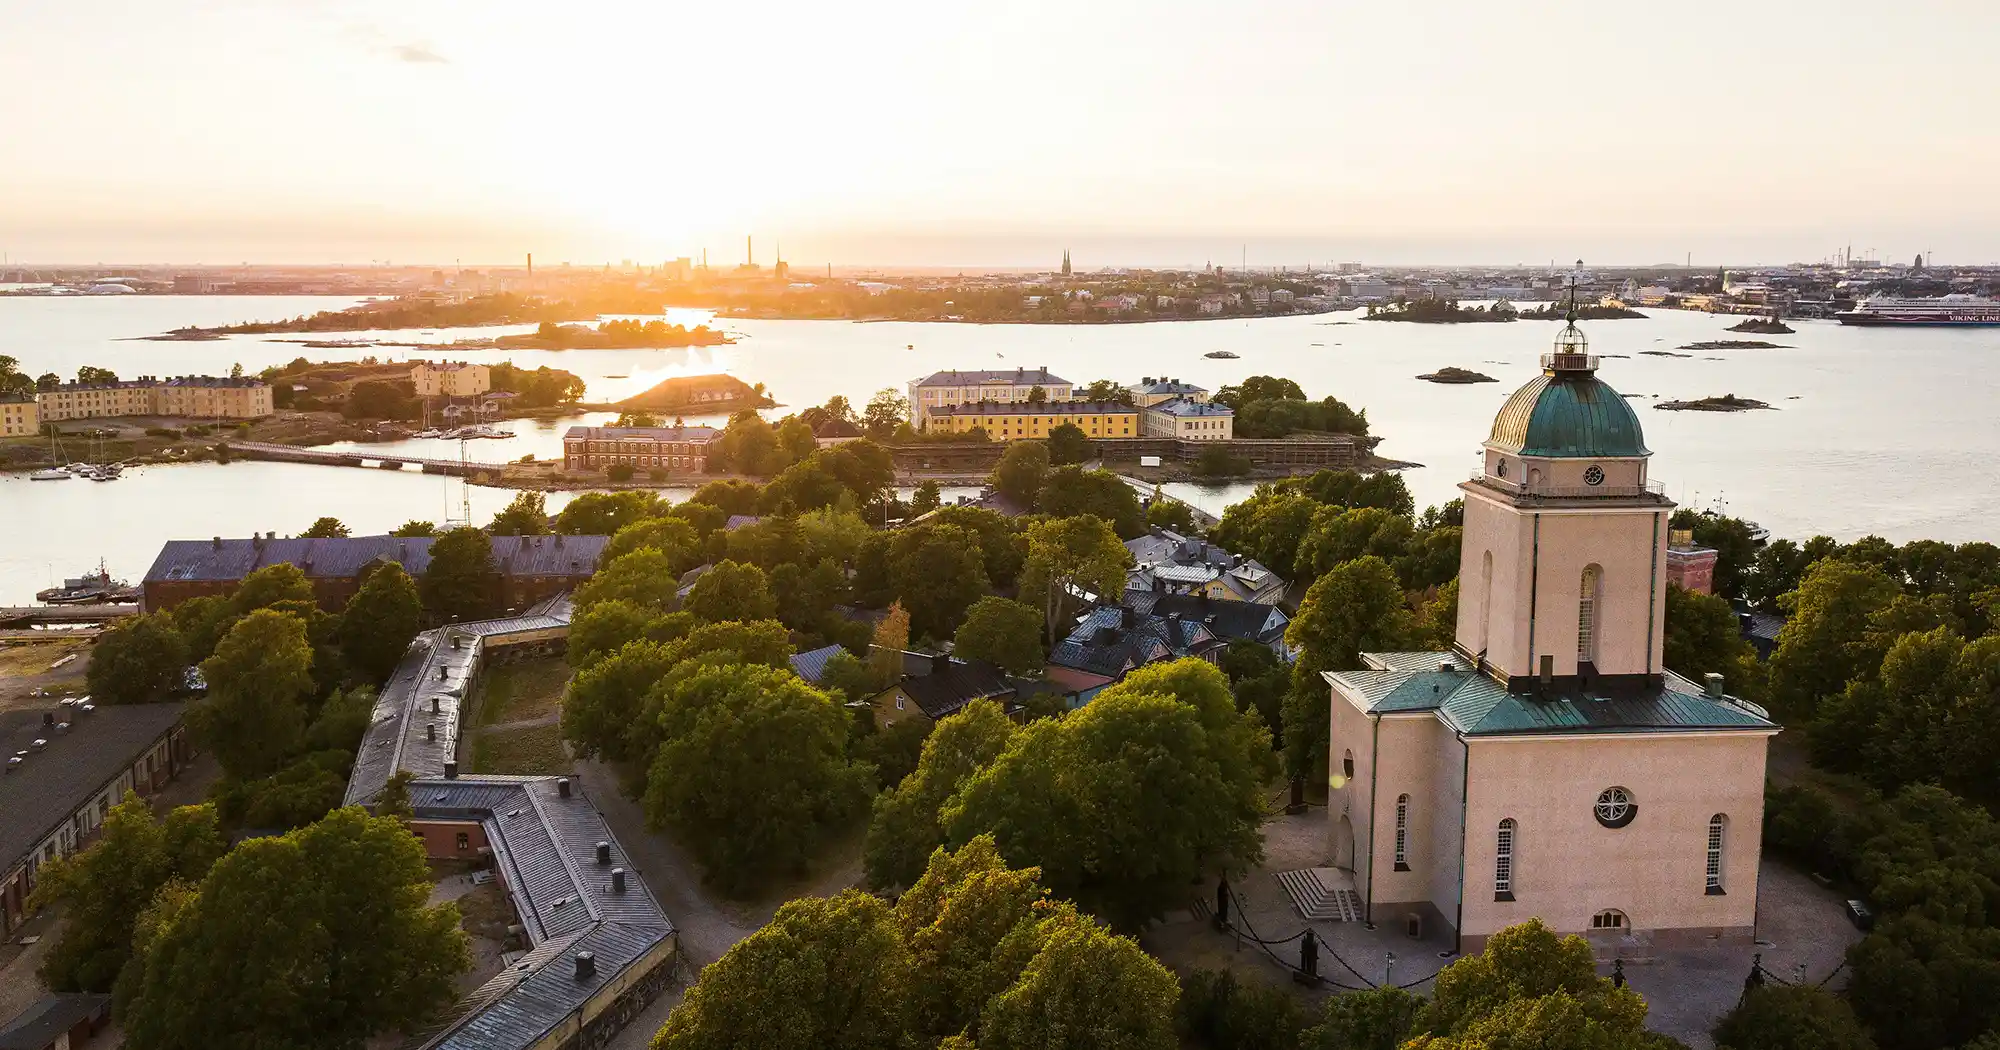 Helsinki at dusk, symbolizing the broad perspective and clarity ESG reporting brings to corporate transparency